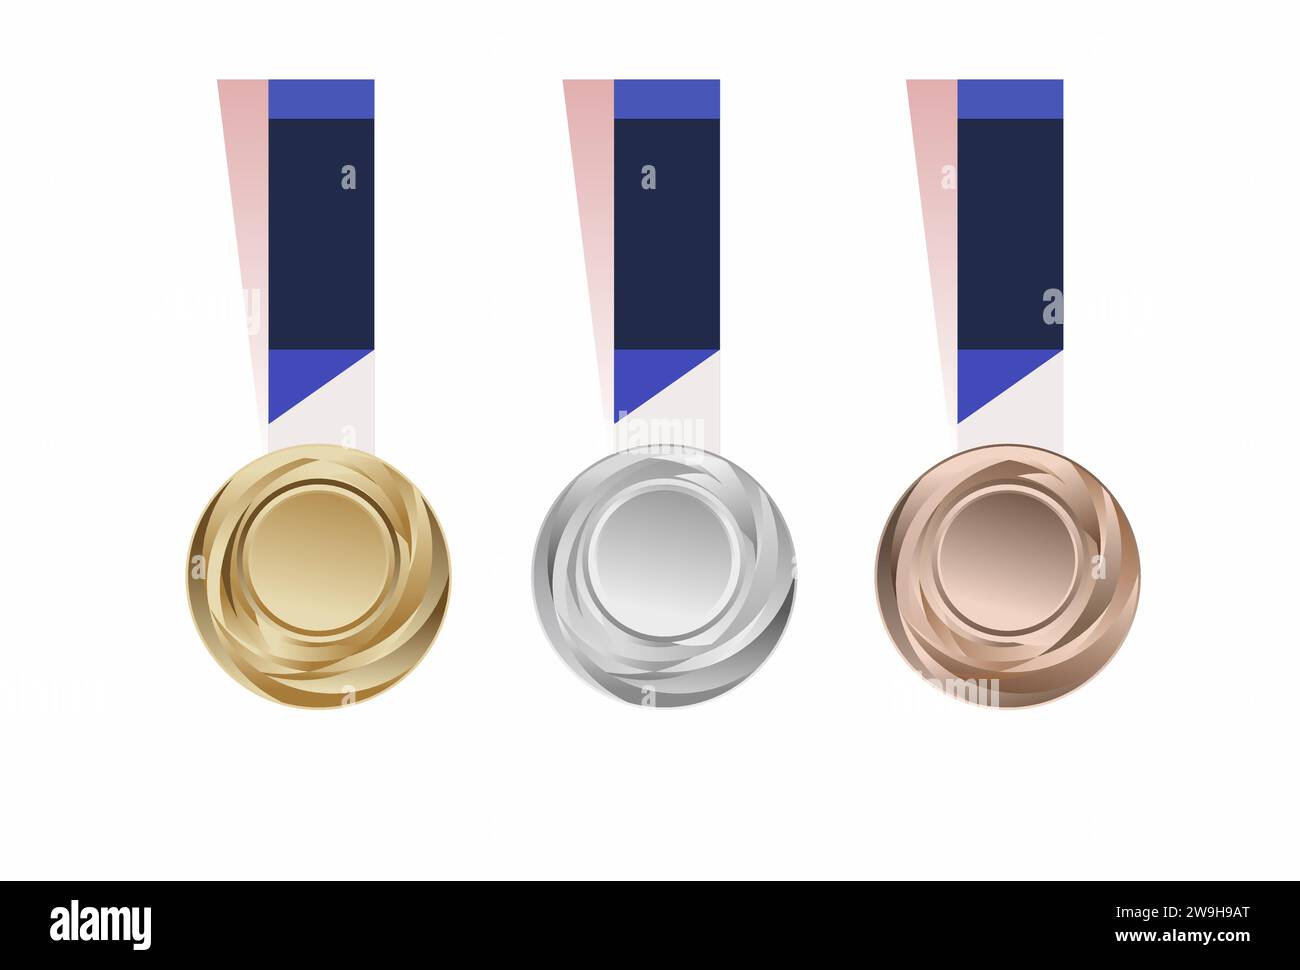 Vector illustration, Set of championship medals, gold, silver and bronze. Stock Vector